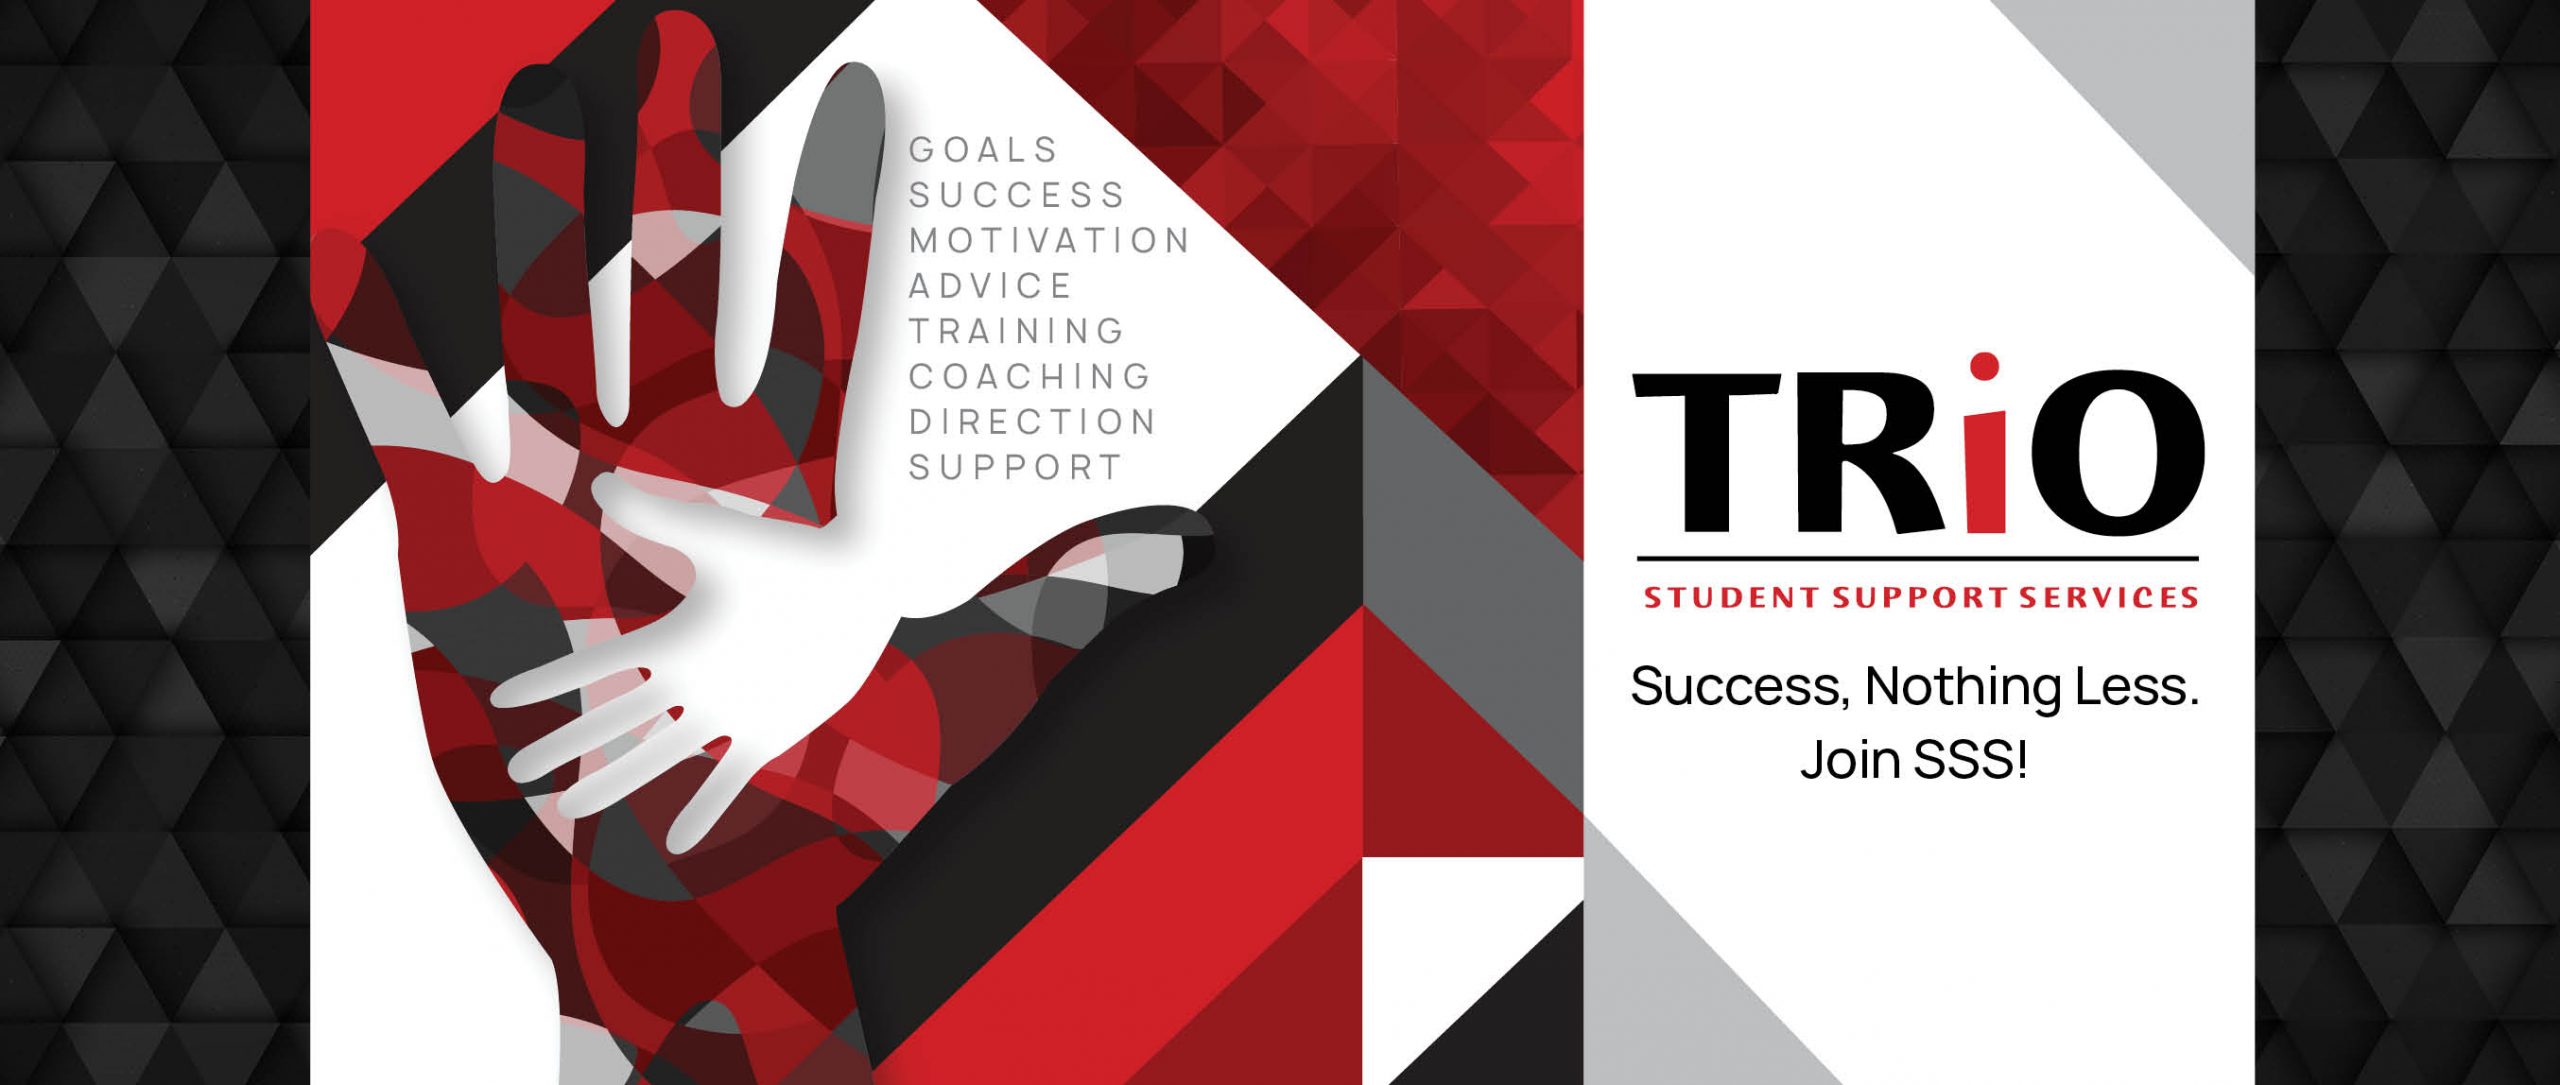 TRiO Student Support Services, Success, nothing less. Join SSS! Goals, success, motivation, advice, training, coaching, direction, support